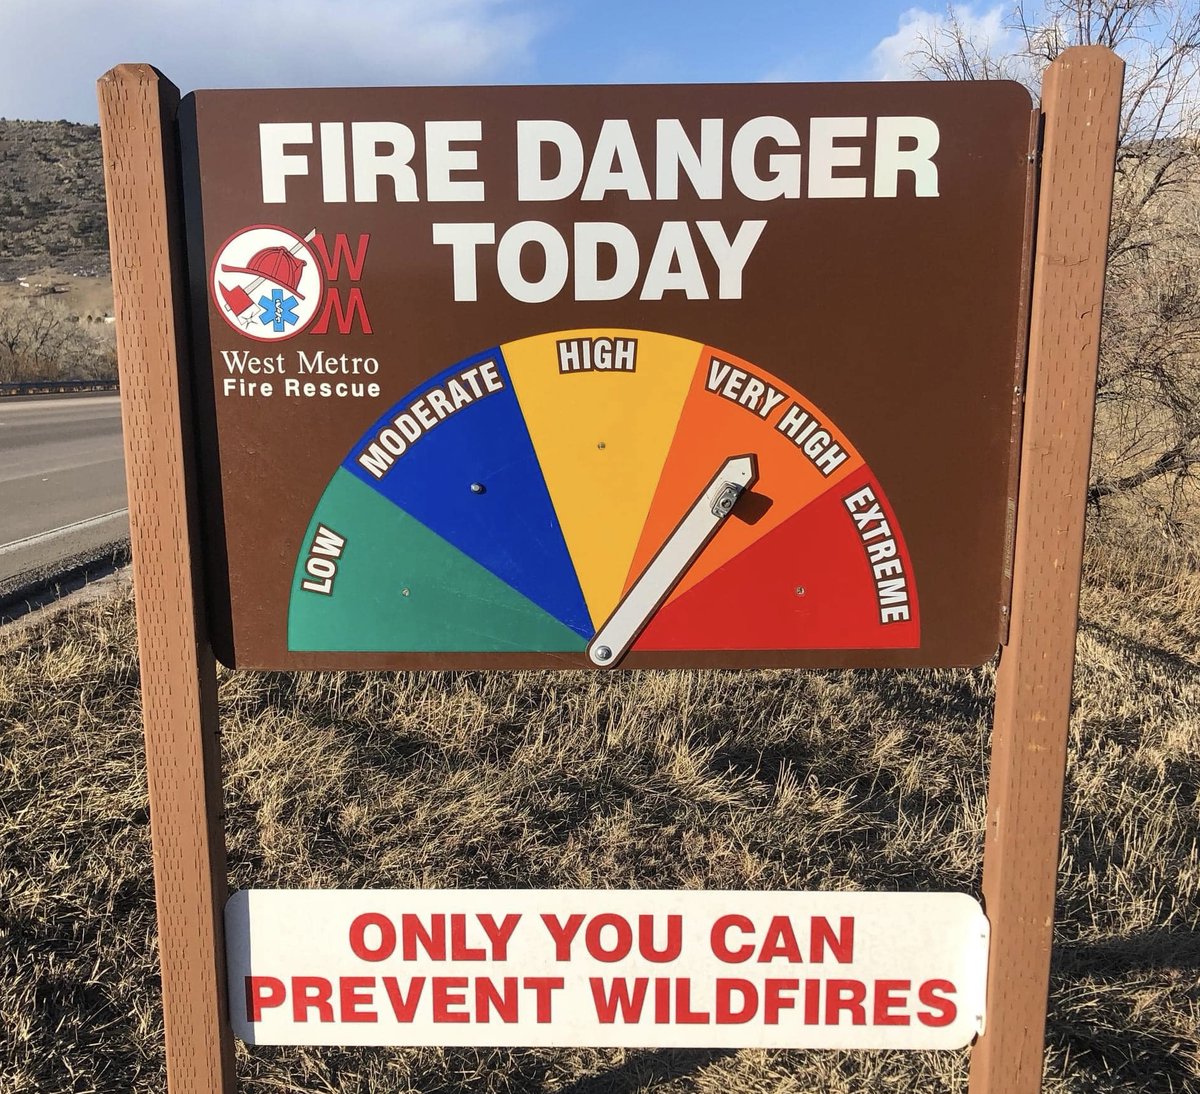 Second day of VERY HIGH fire danger in West Metro's district & a red flag warning. Wind + dry fuels (vegetation) + low humidity = potential for a fast-moving fire. Be prepared: sign up for emergency alerts: JeffCo: jeffco.us/473/Emergency-… DougCo: bit.ly/3TKbHMh